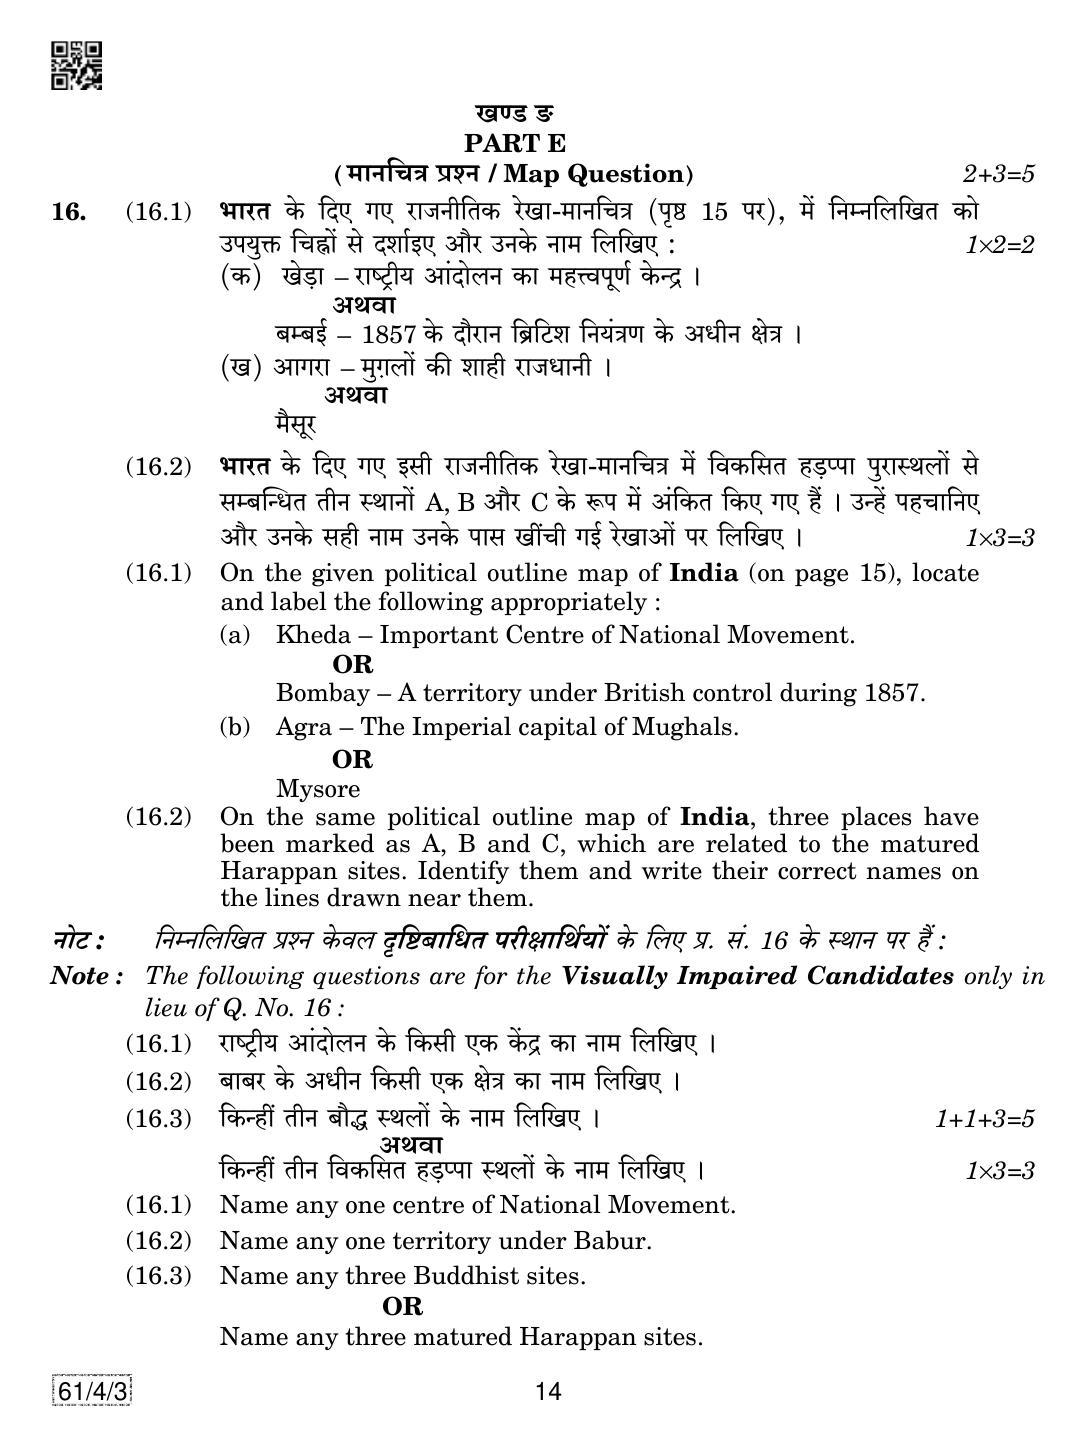 CBSE Class 12 61-4-3 History 2019 Question Paper - Page 14